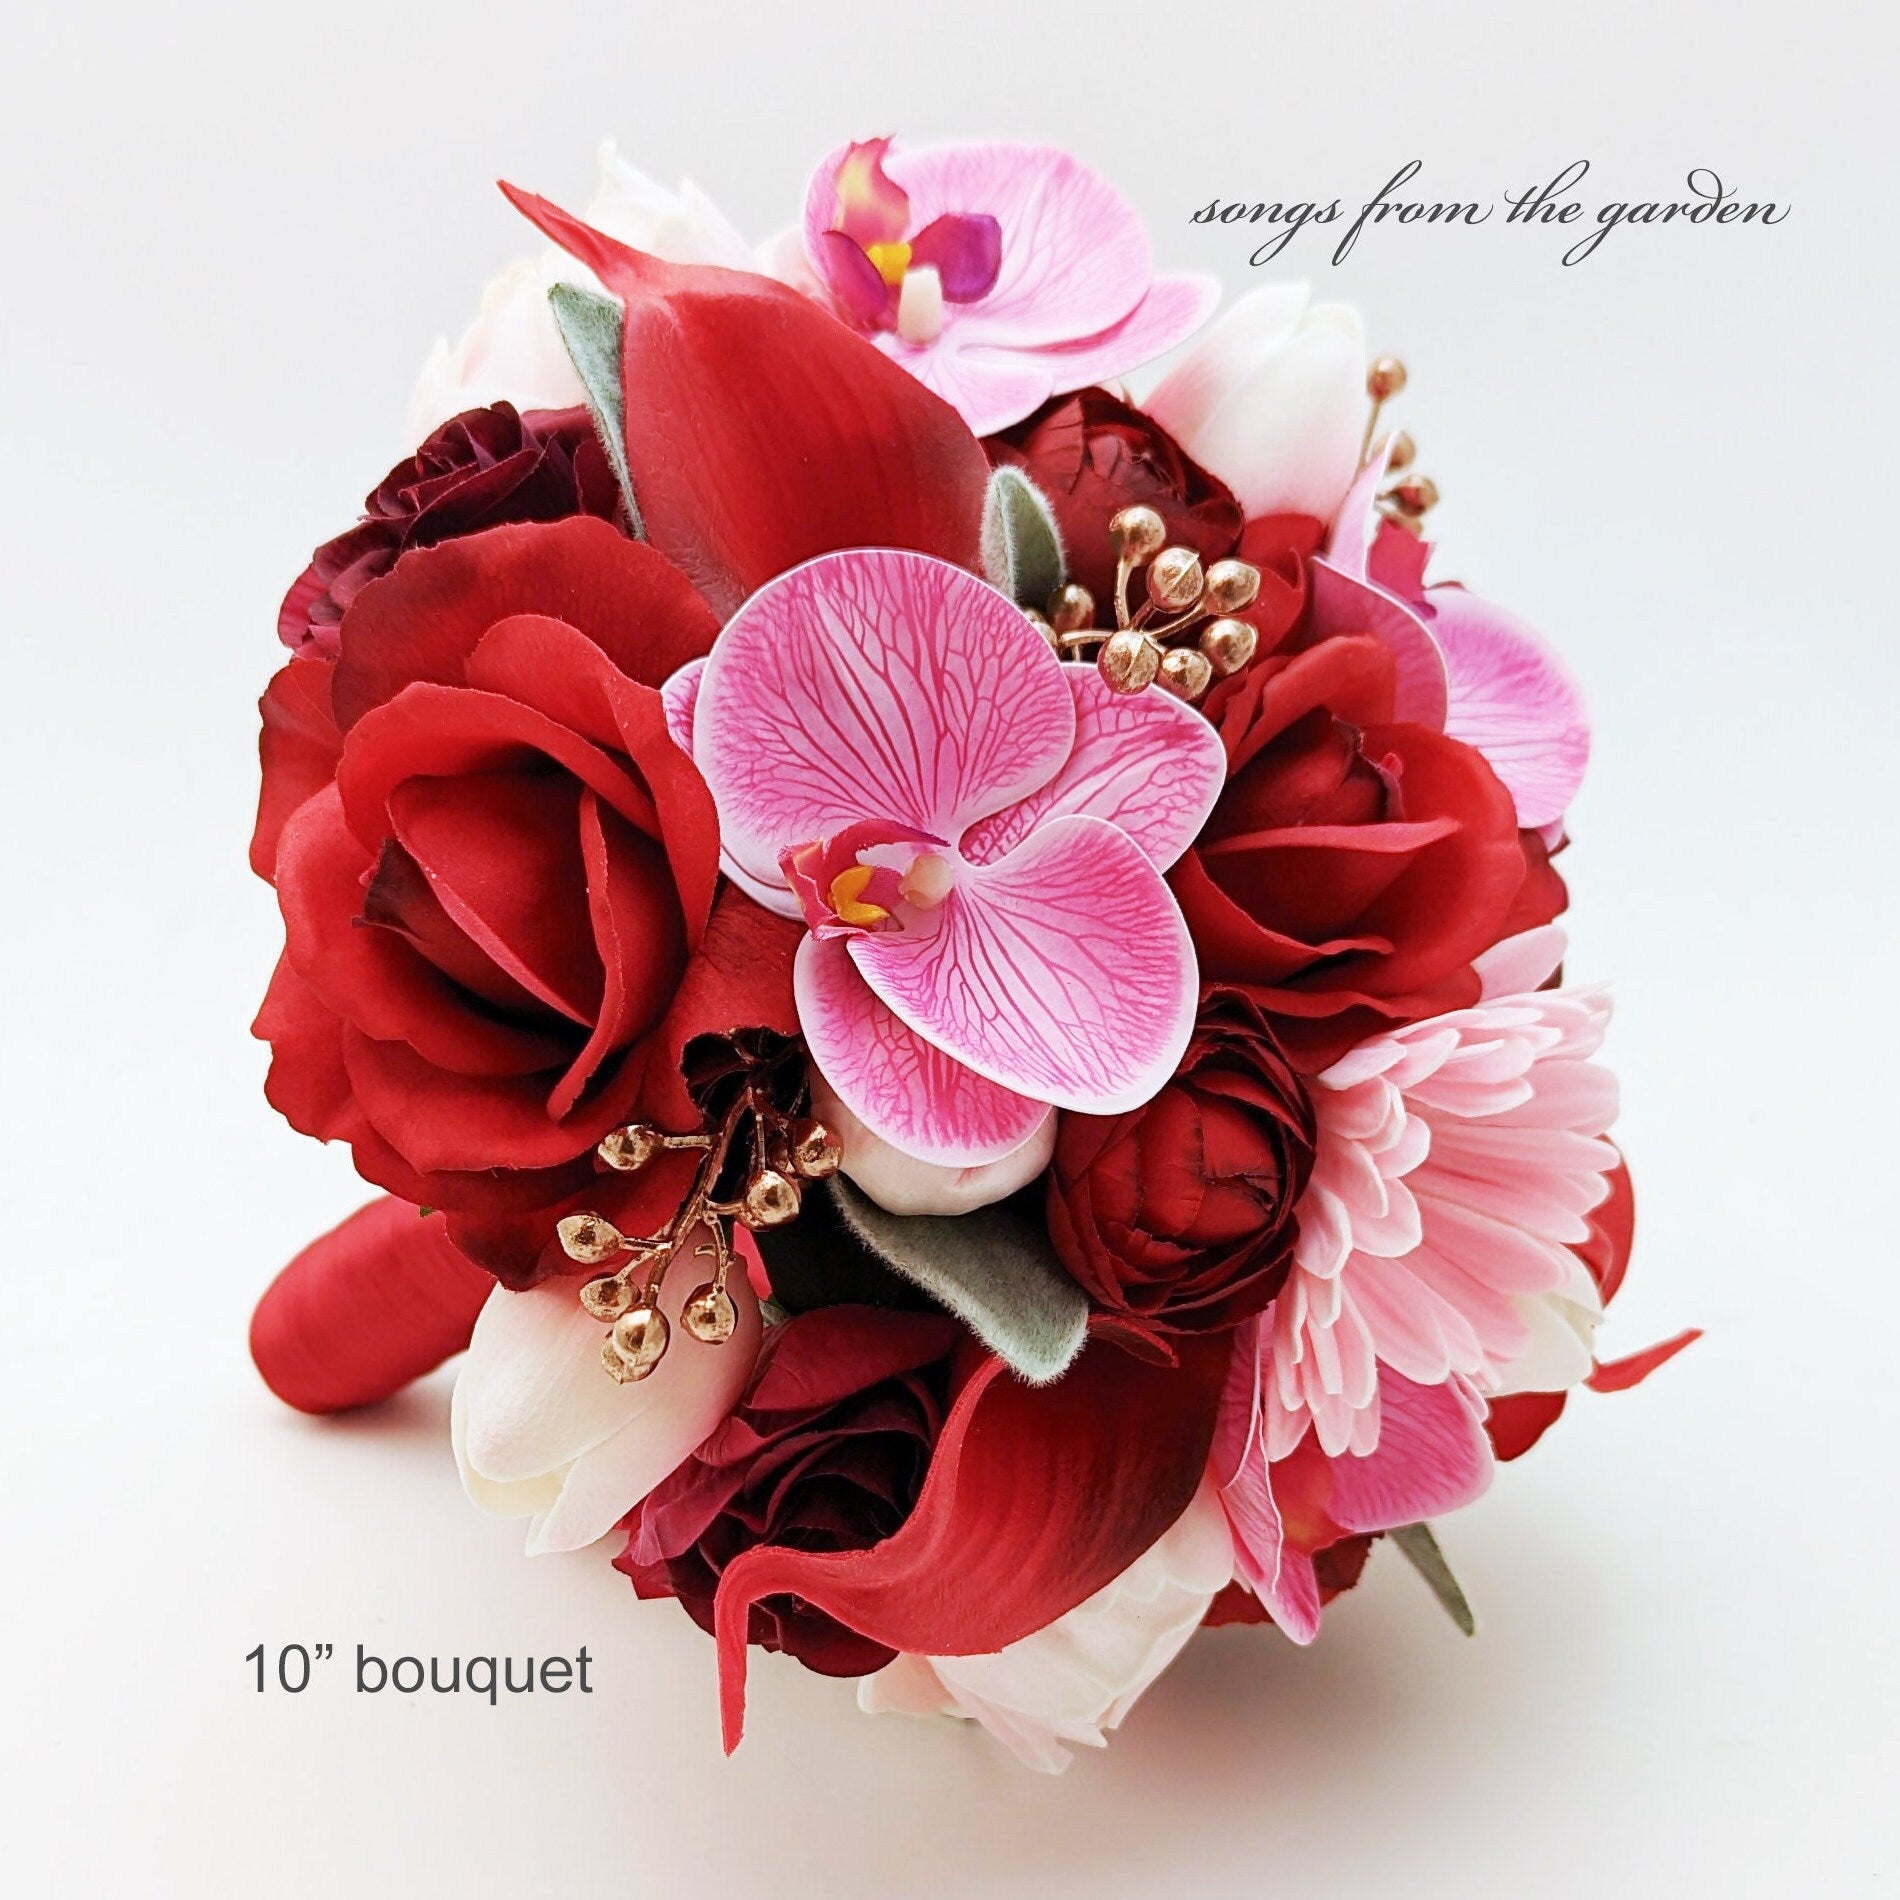 Bridal or Bridesmaid Bouquet - Rose Gold Red Pink Daisy Ranunculus Tulips Callas Berries Peonies Roses - add Boutonniere Corsge and More!